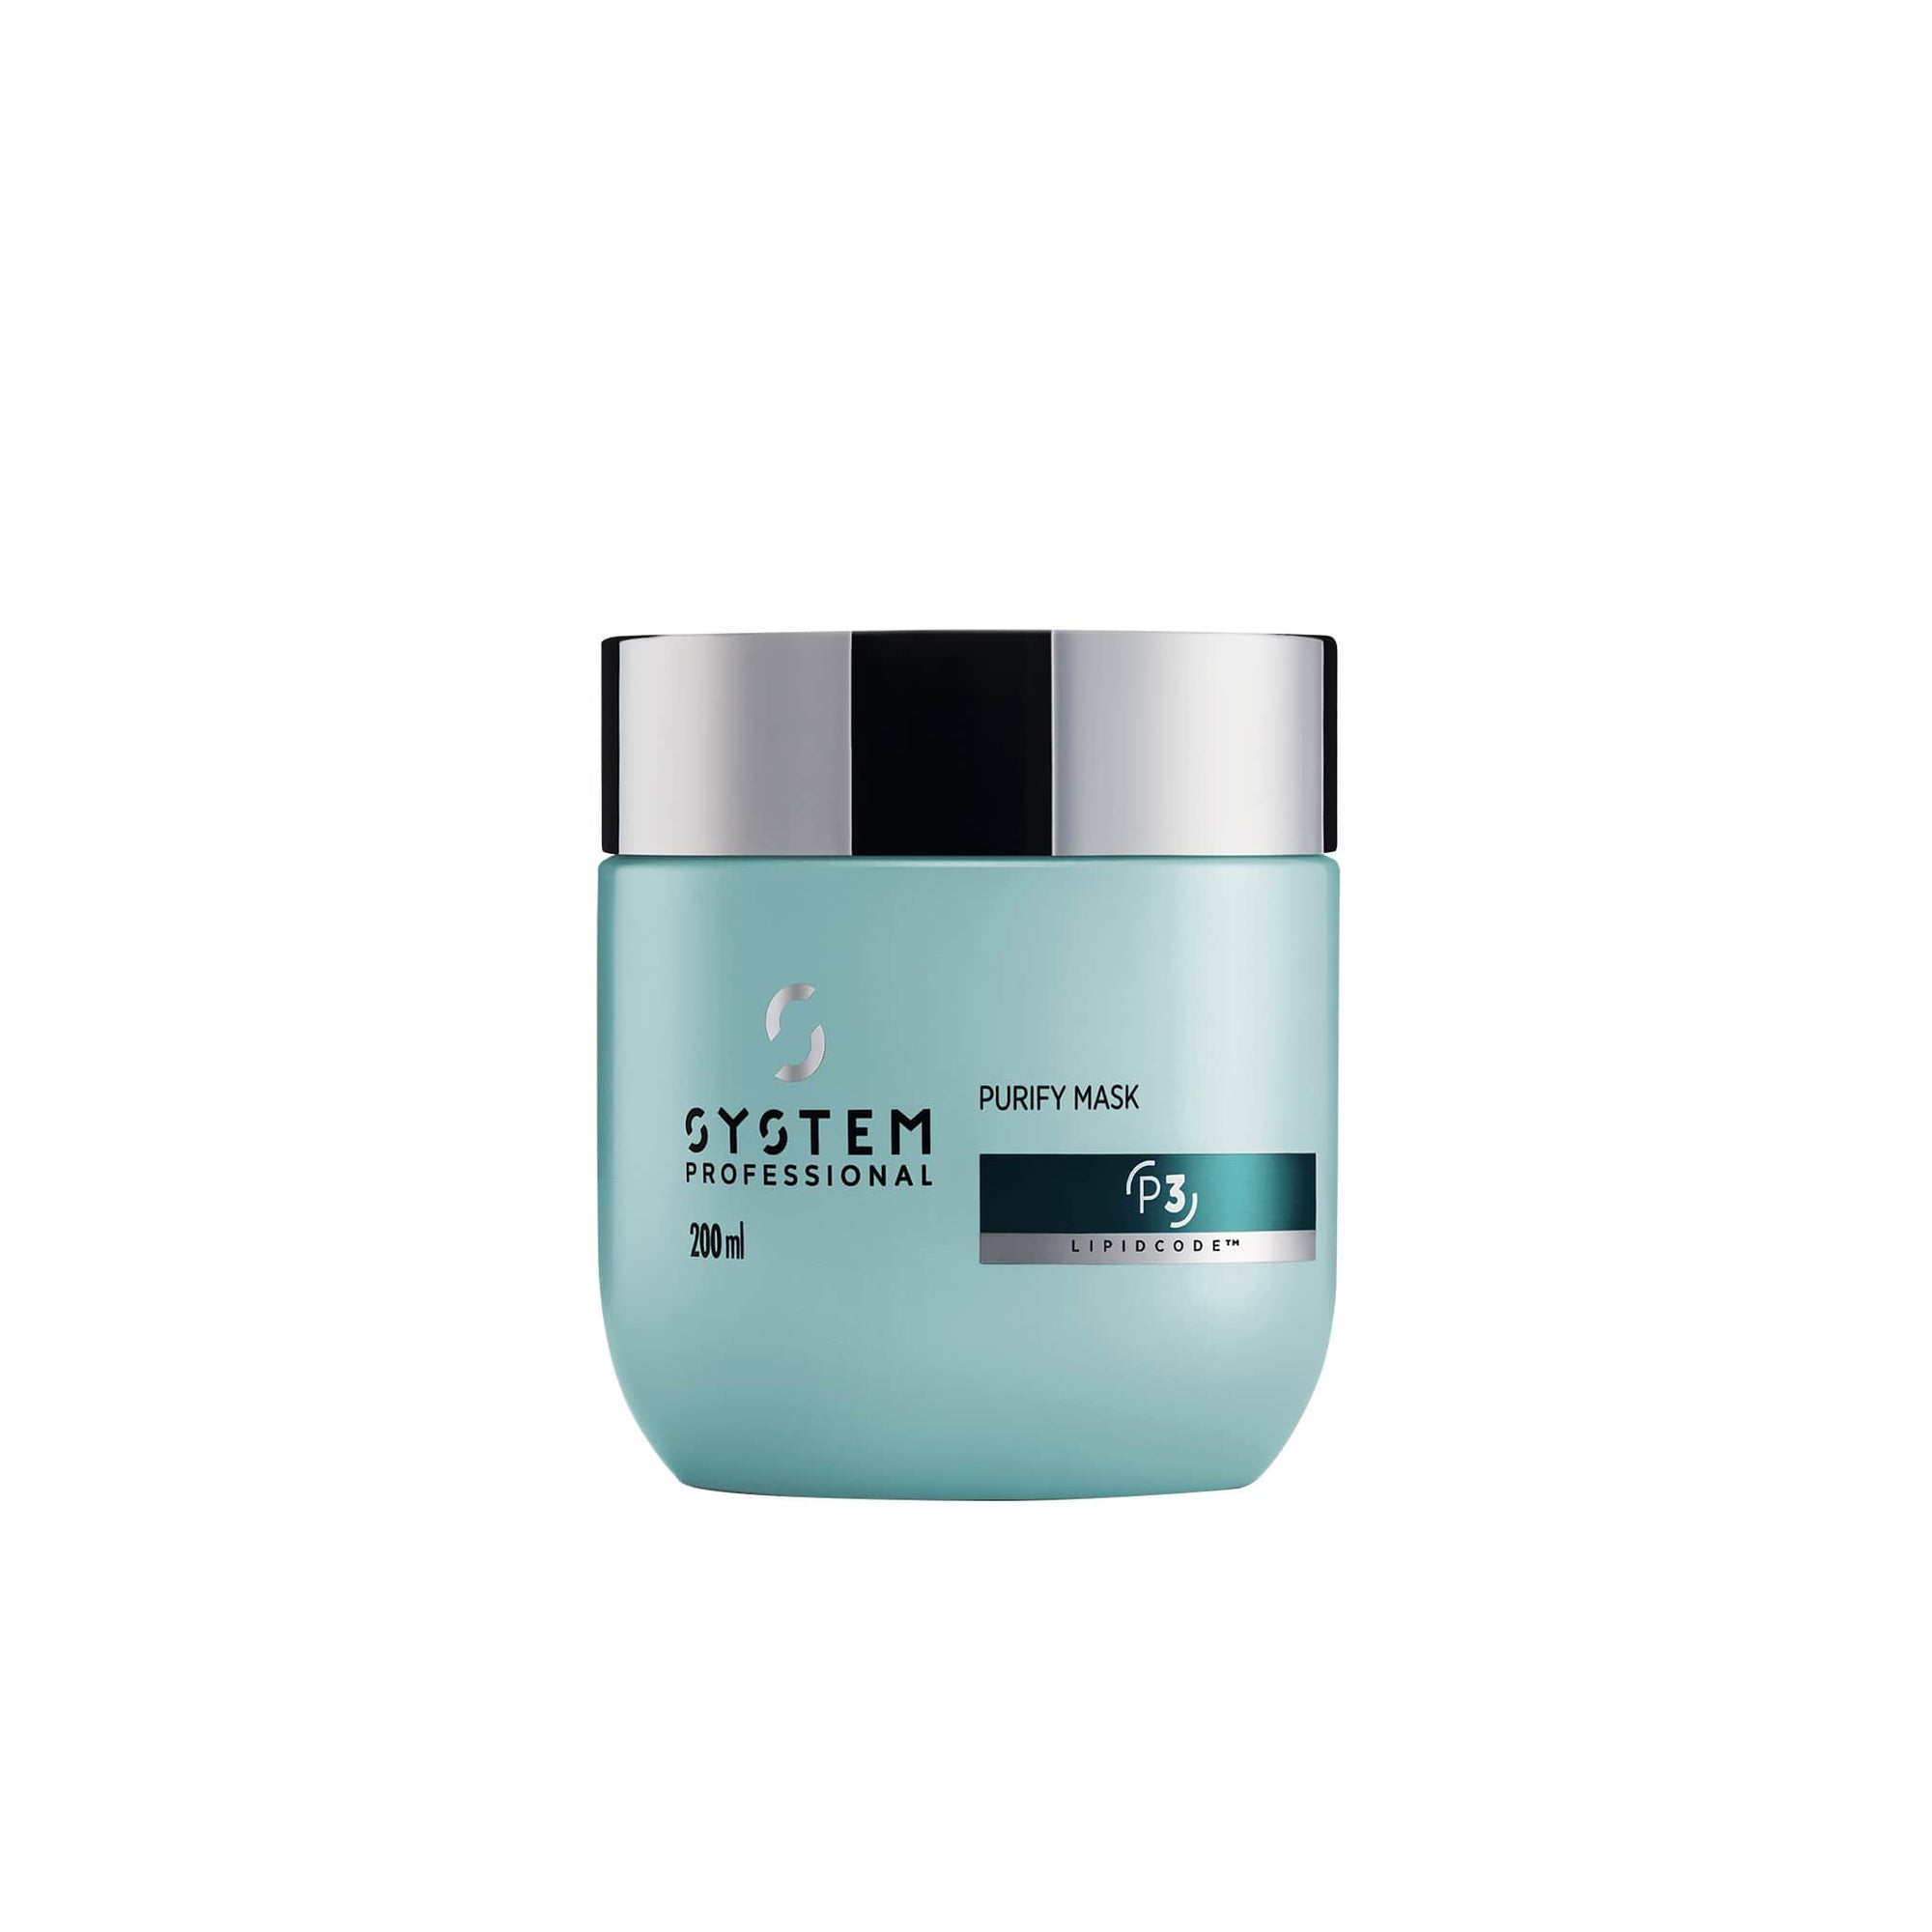 System Professional Purify Mask - Shop online | Retail Box